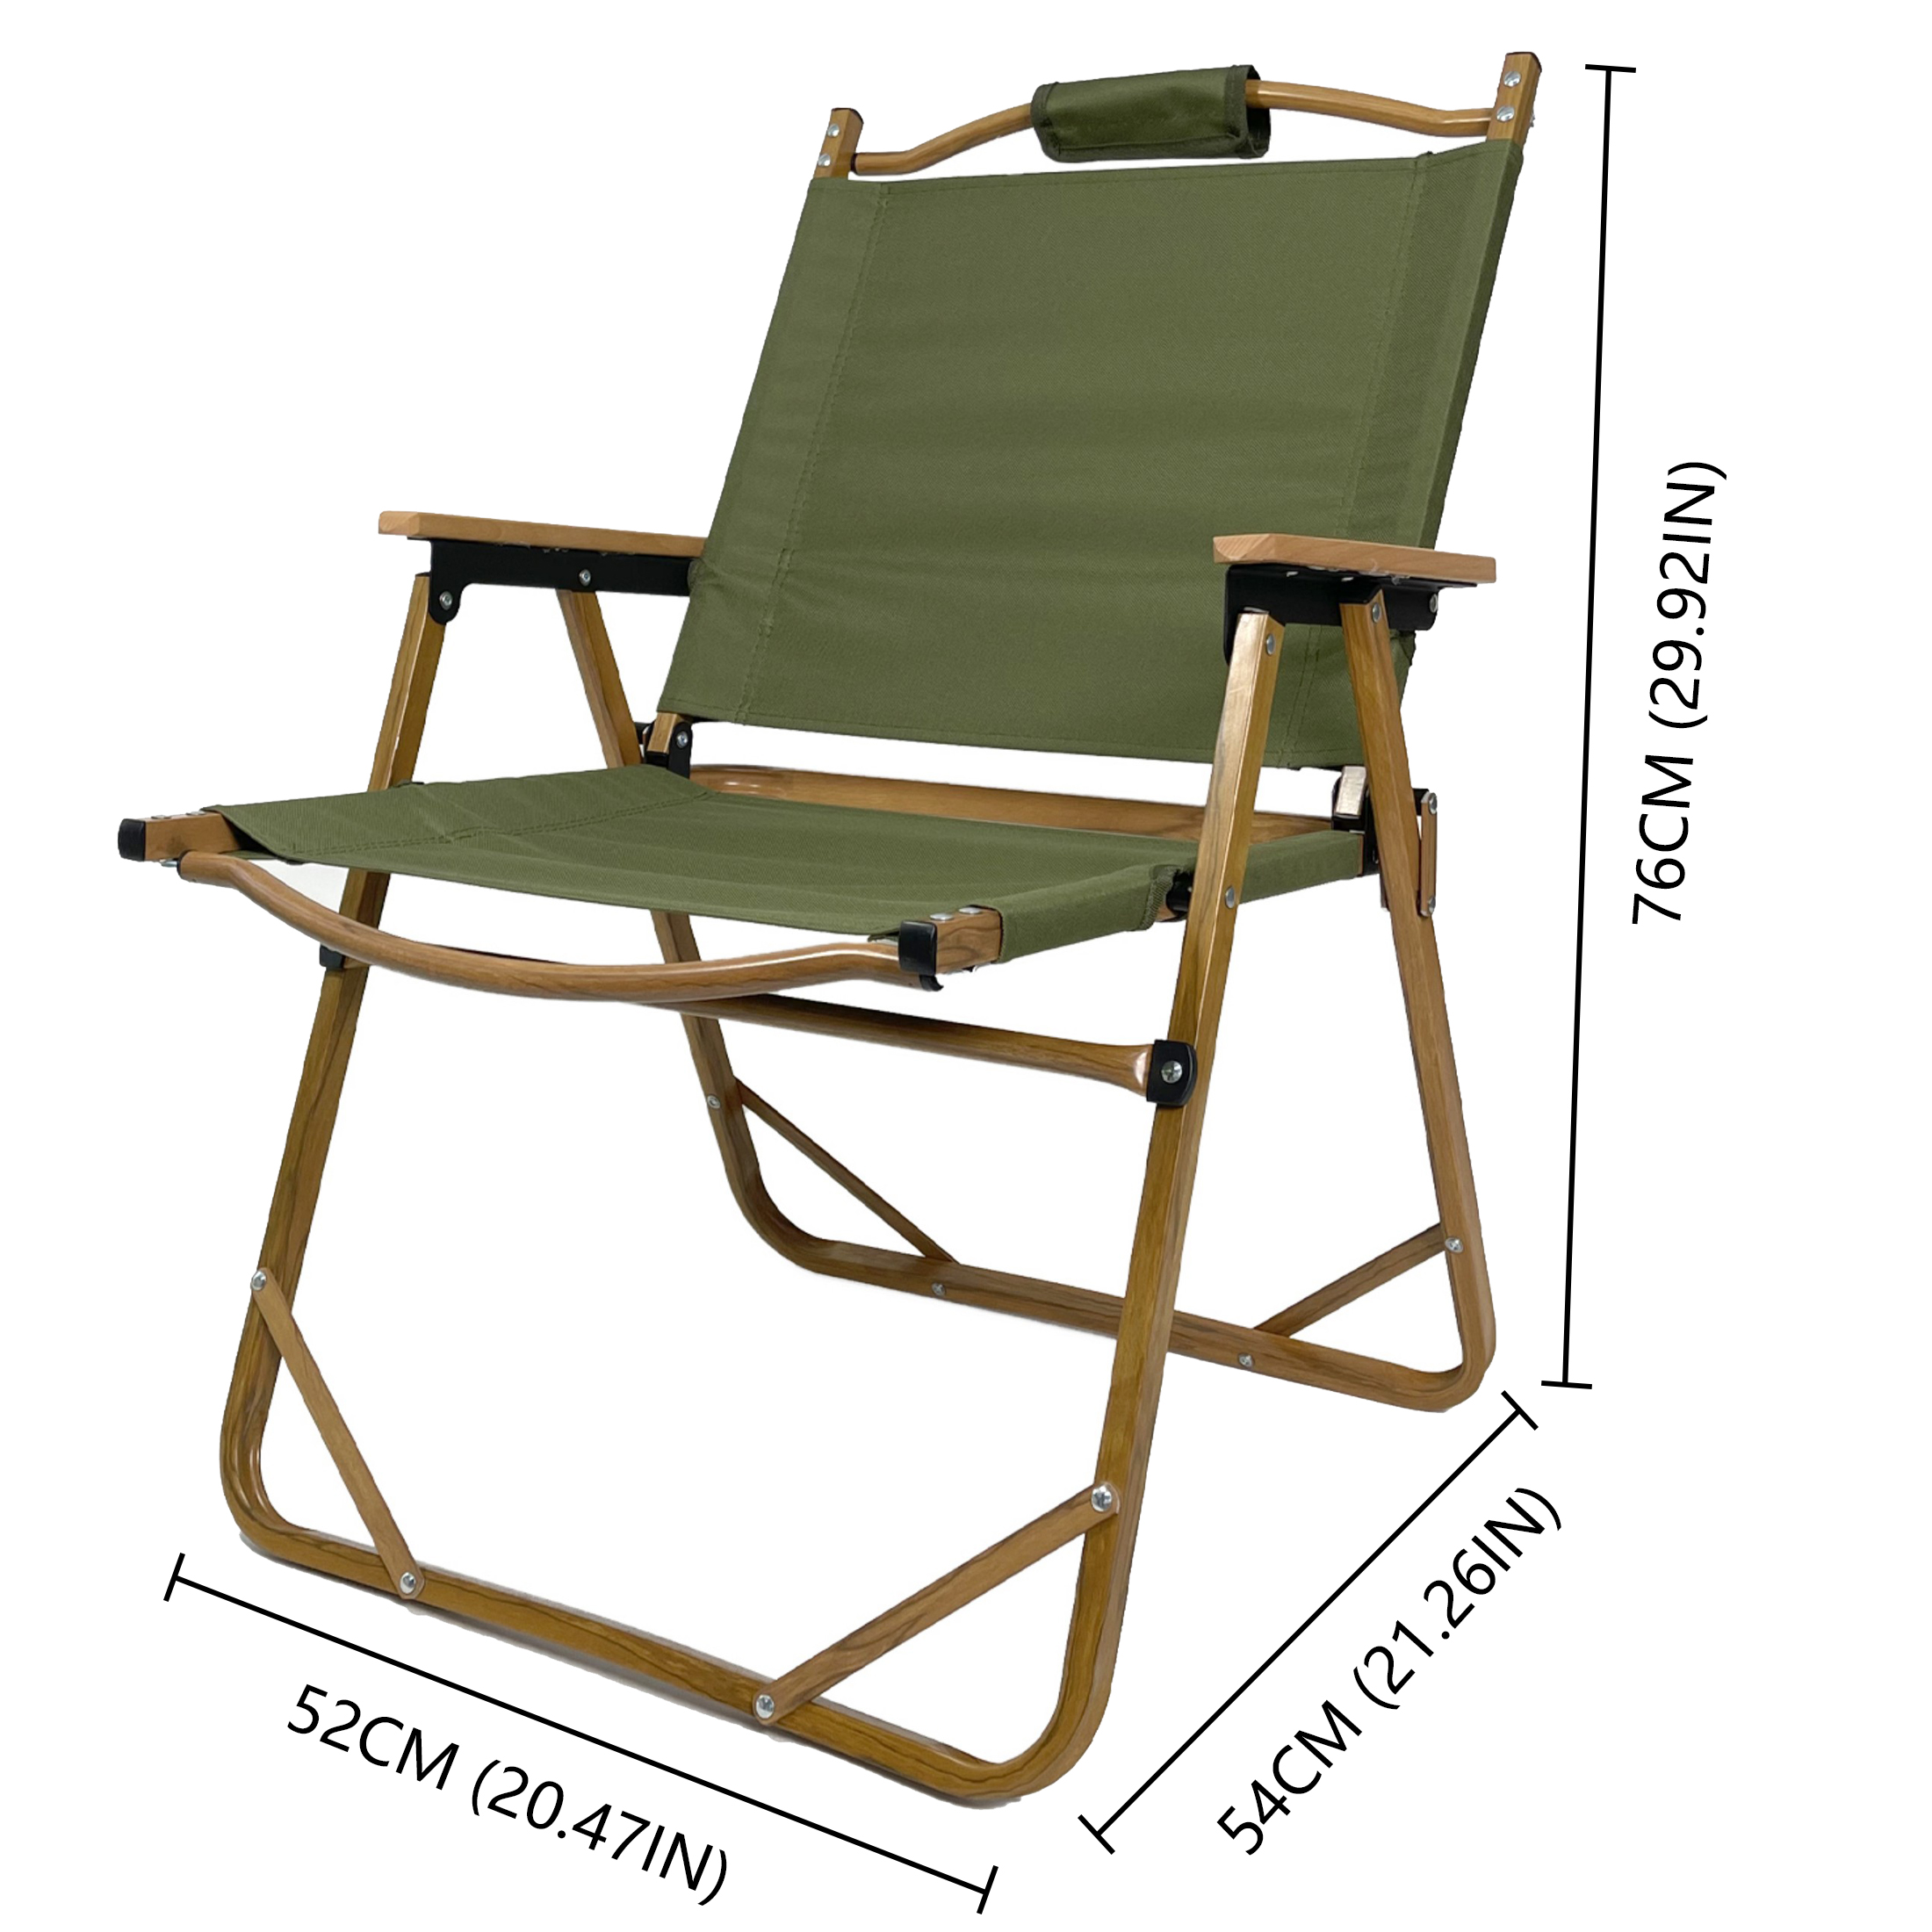 US$ 79.99 - Sunyear Camping Chairs Kermit Chair - Outdoor Furniture Kermit  Aluminum Portable Folding Chair Great for Travel Camping Picnic Park 